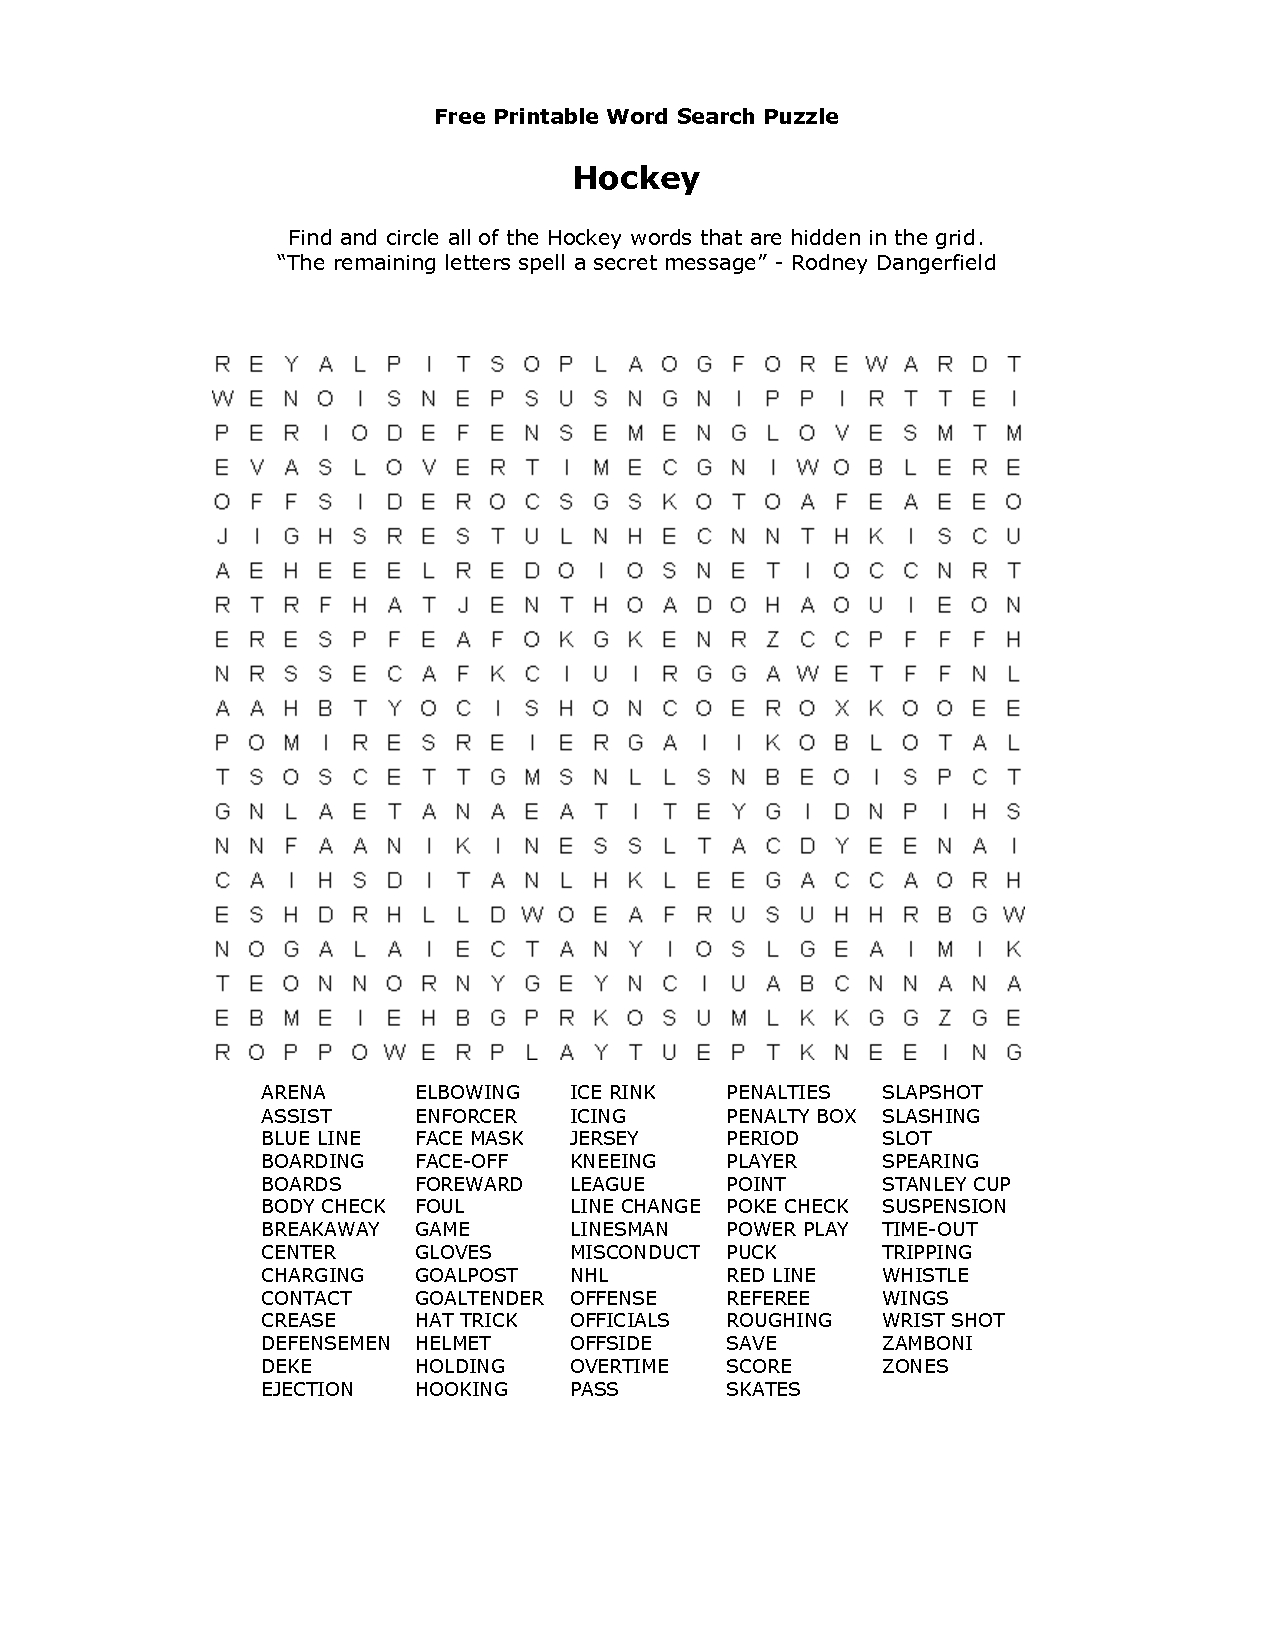 Free Printable Word Searches | Kiddo Shelter - Free Printable Word Searches